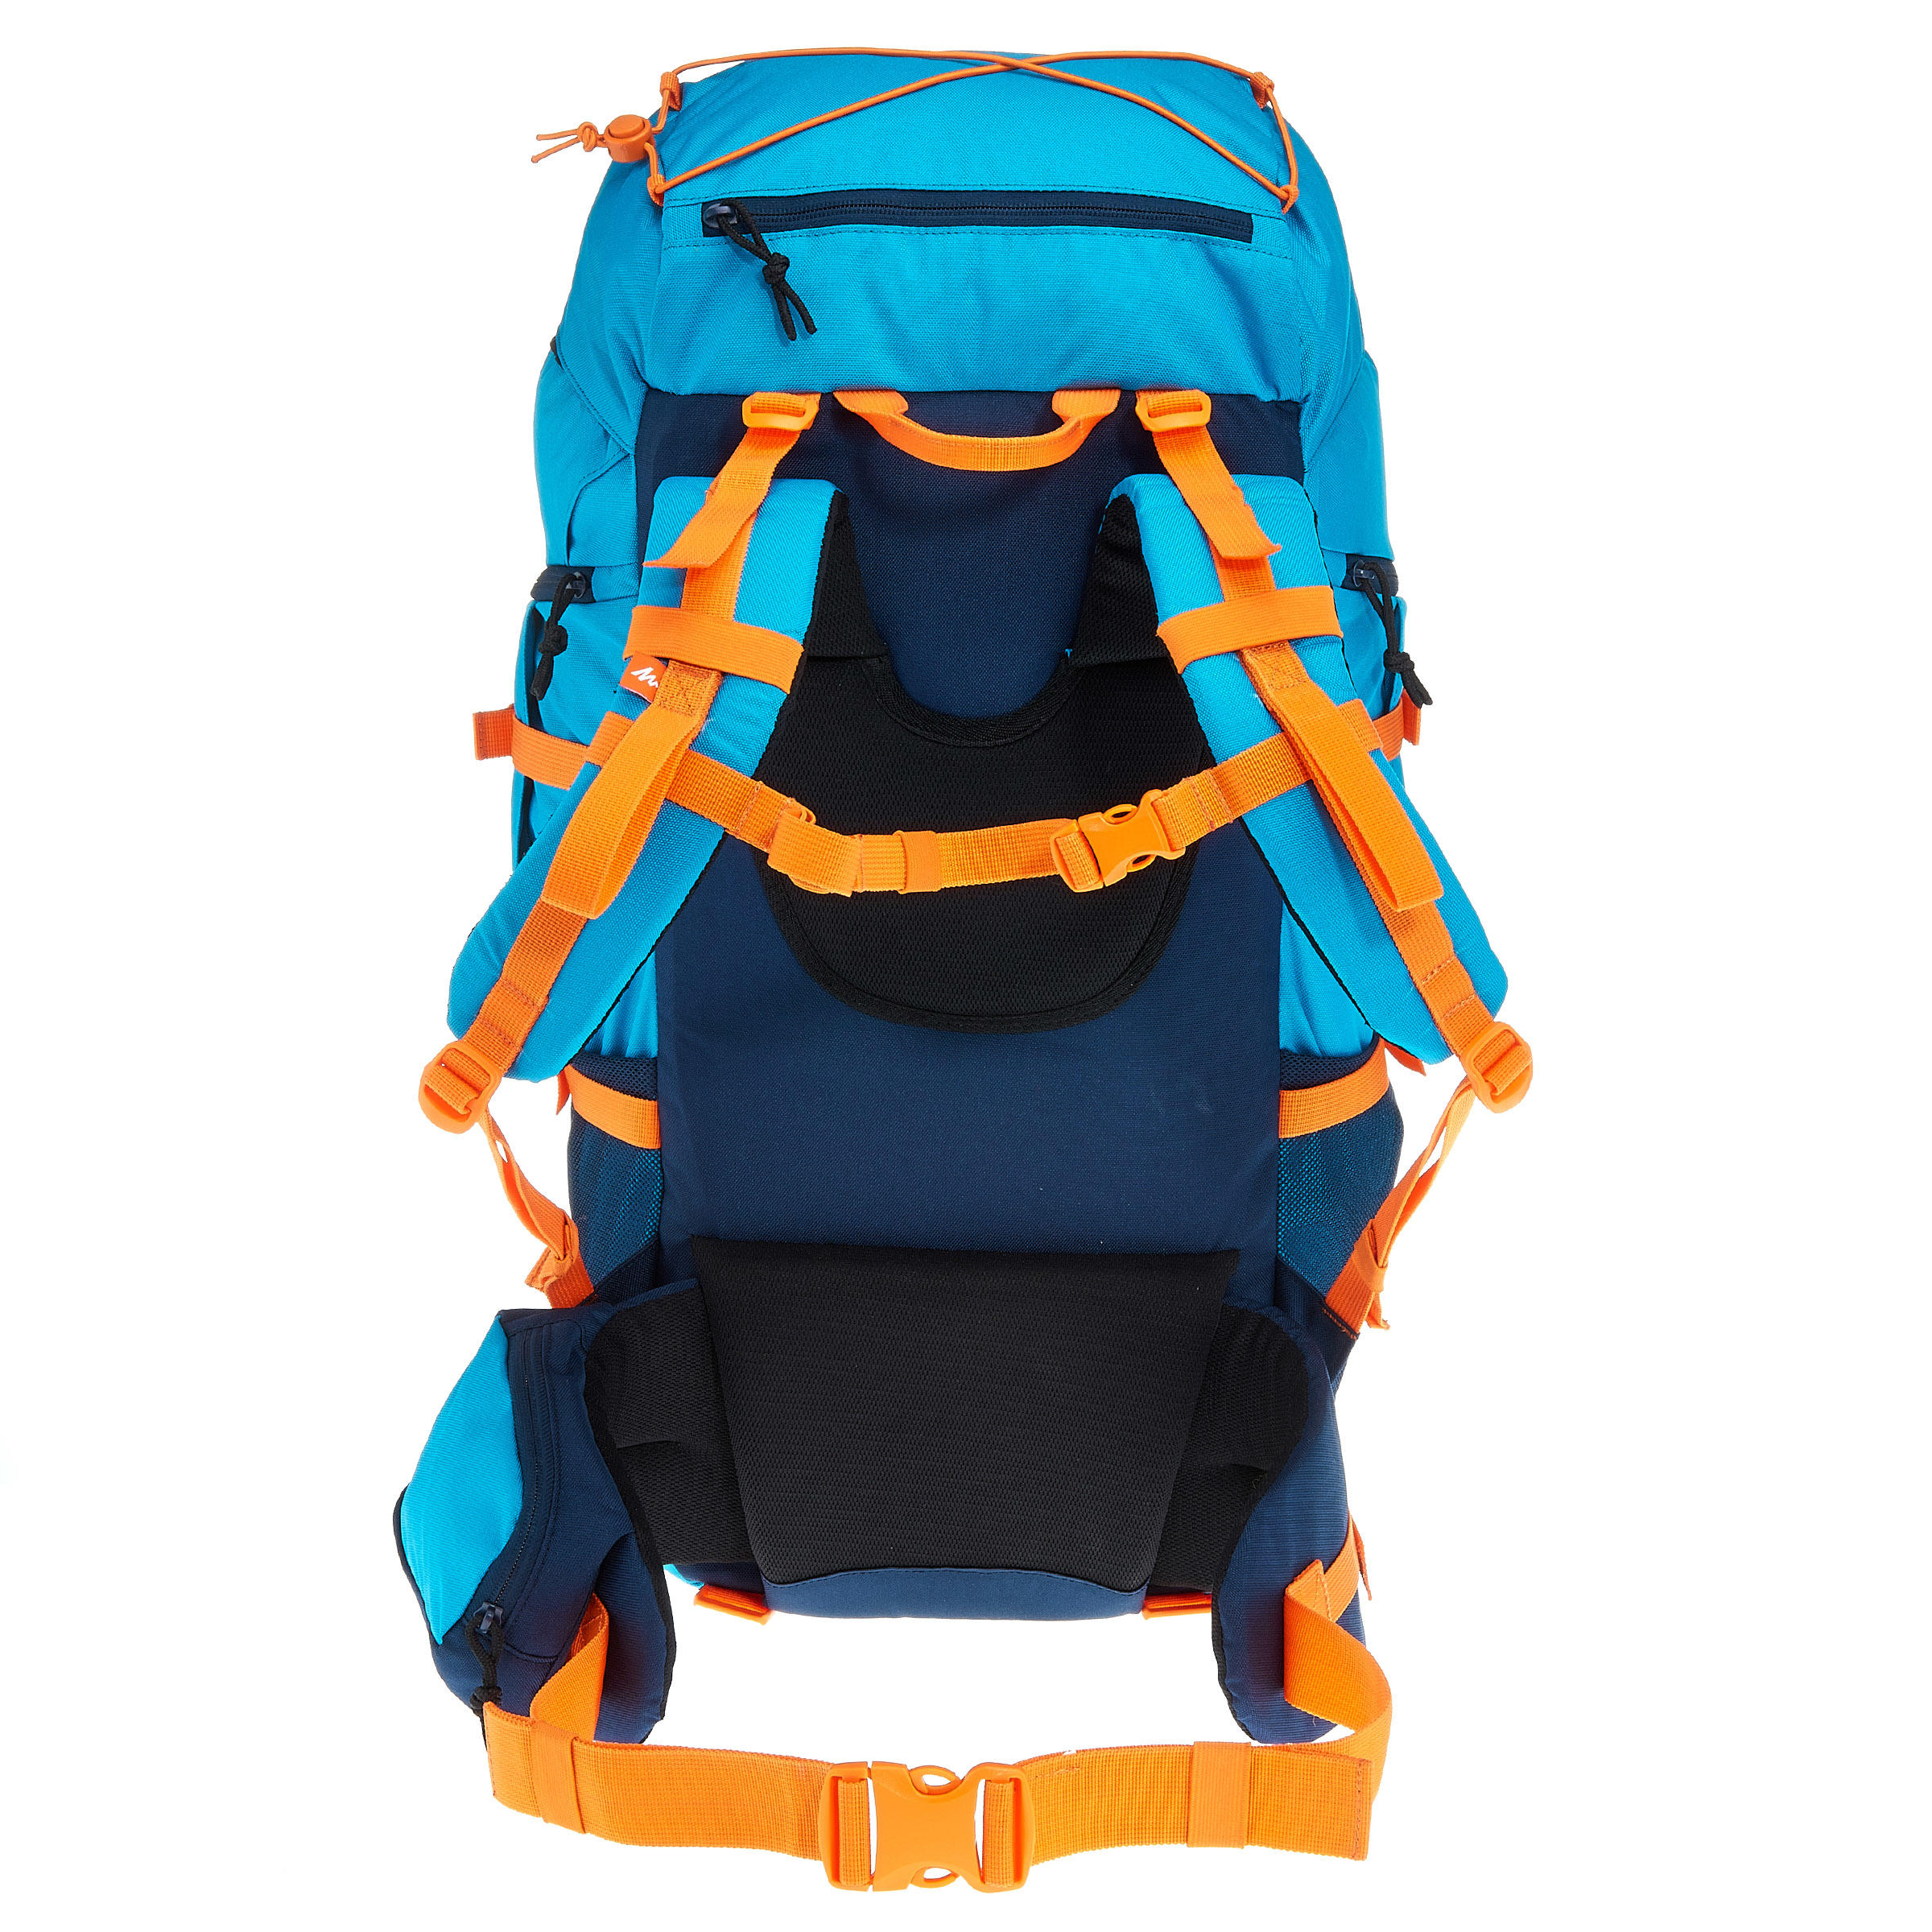 hiking backpack stores near me